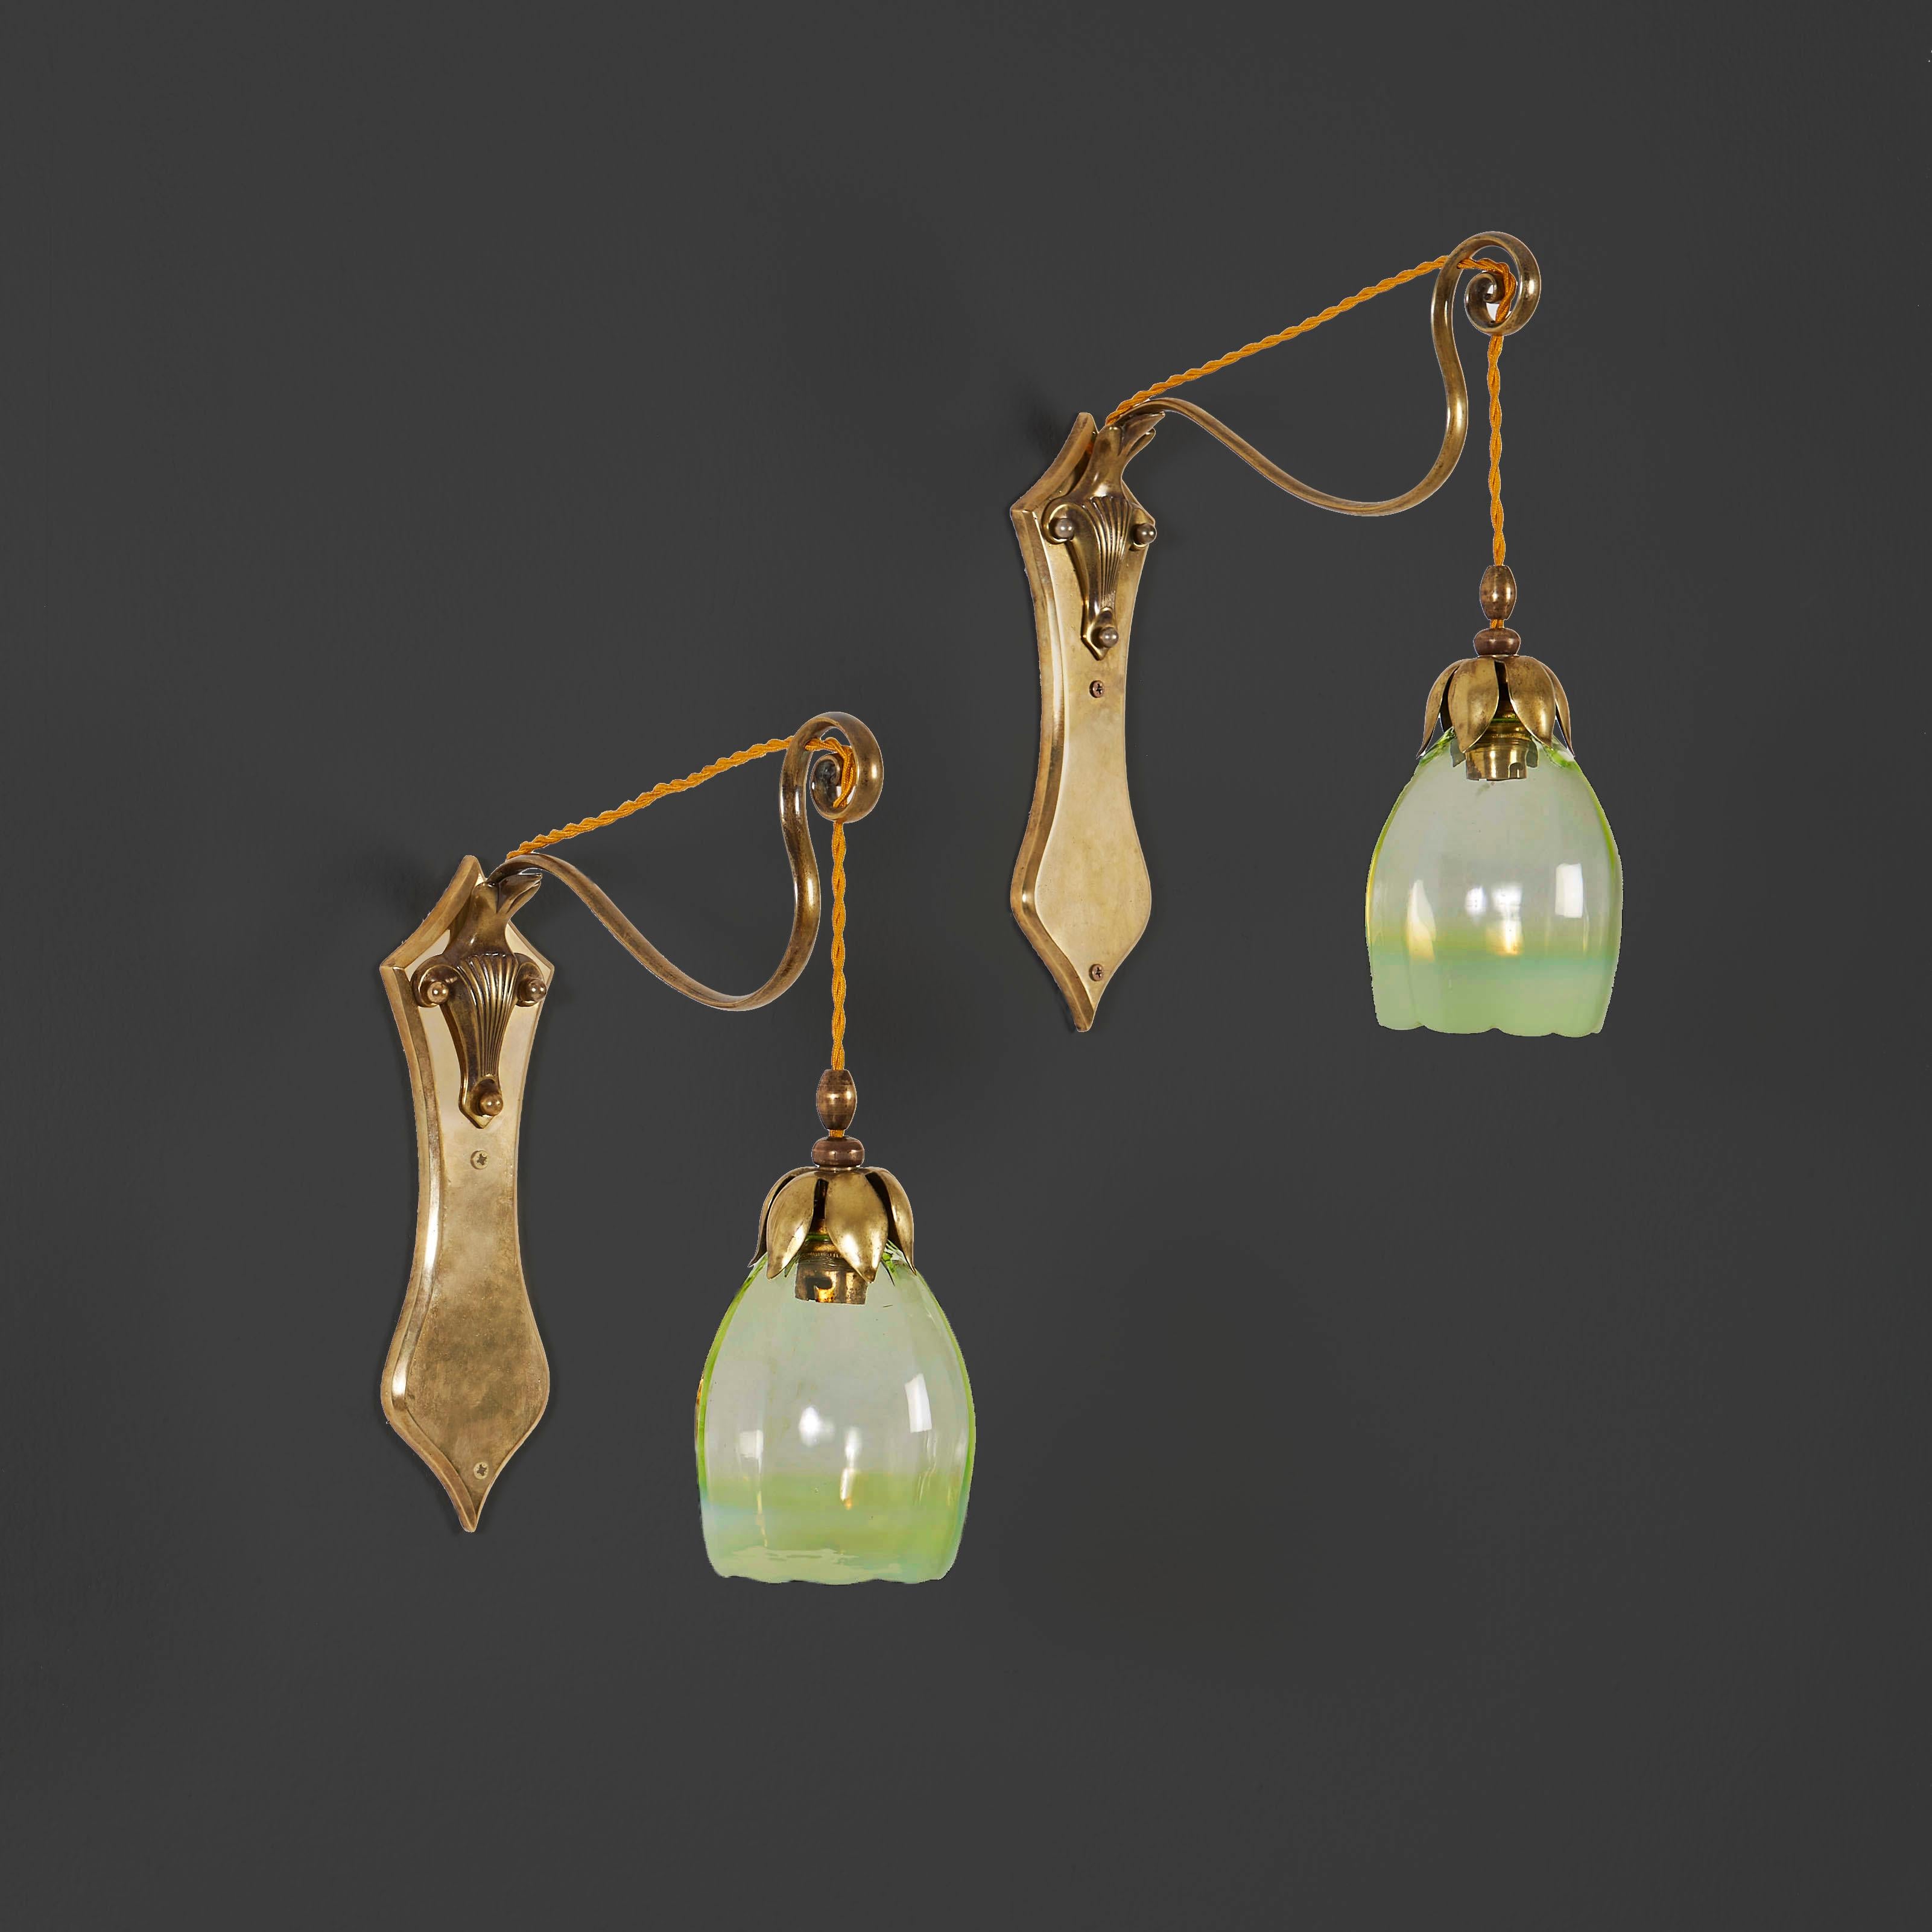 A pair of wall lights by W. A. S. Benson, with scrolling arm supporting the original opaline glass shade in the shape of a flower, decorated with brass sepals, all mounted on brass plates decorated with abstract foliate motif.

Currently wired for